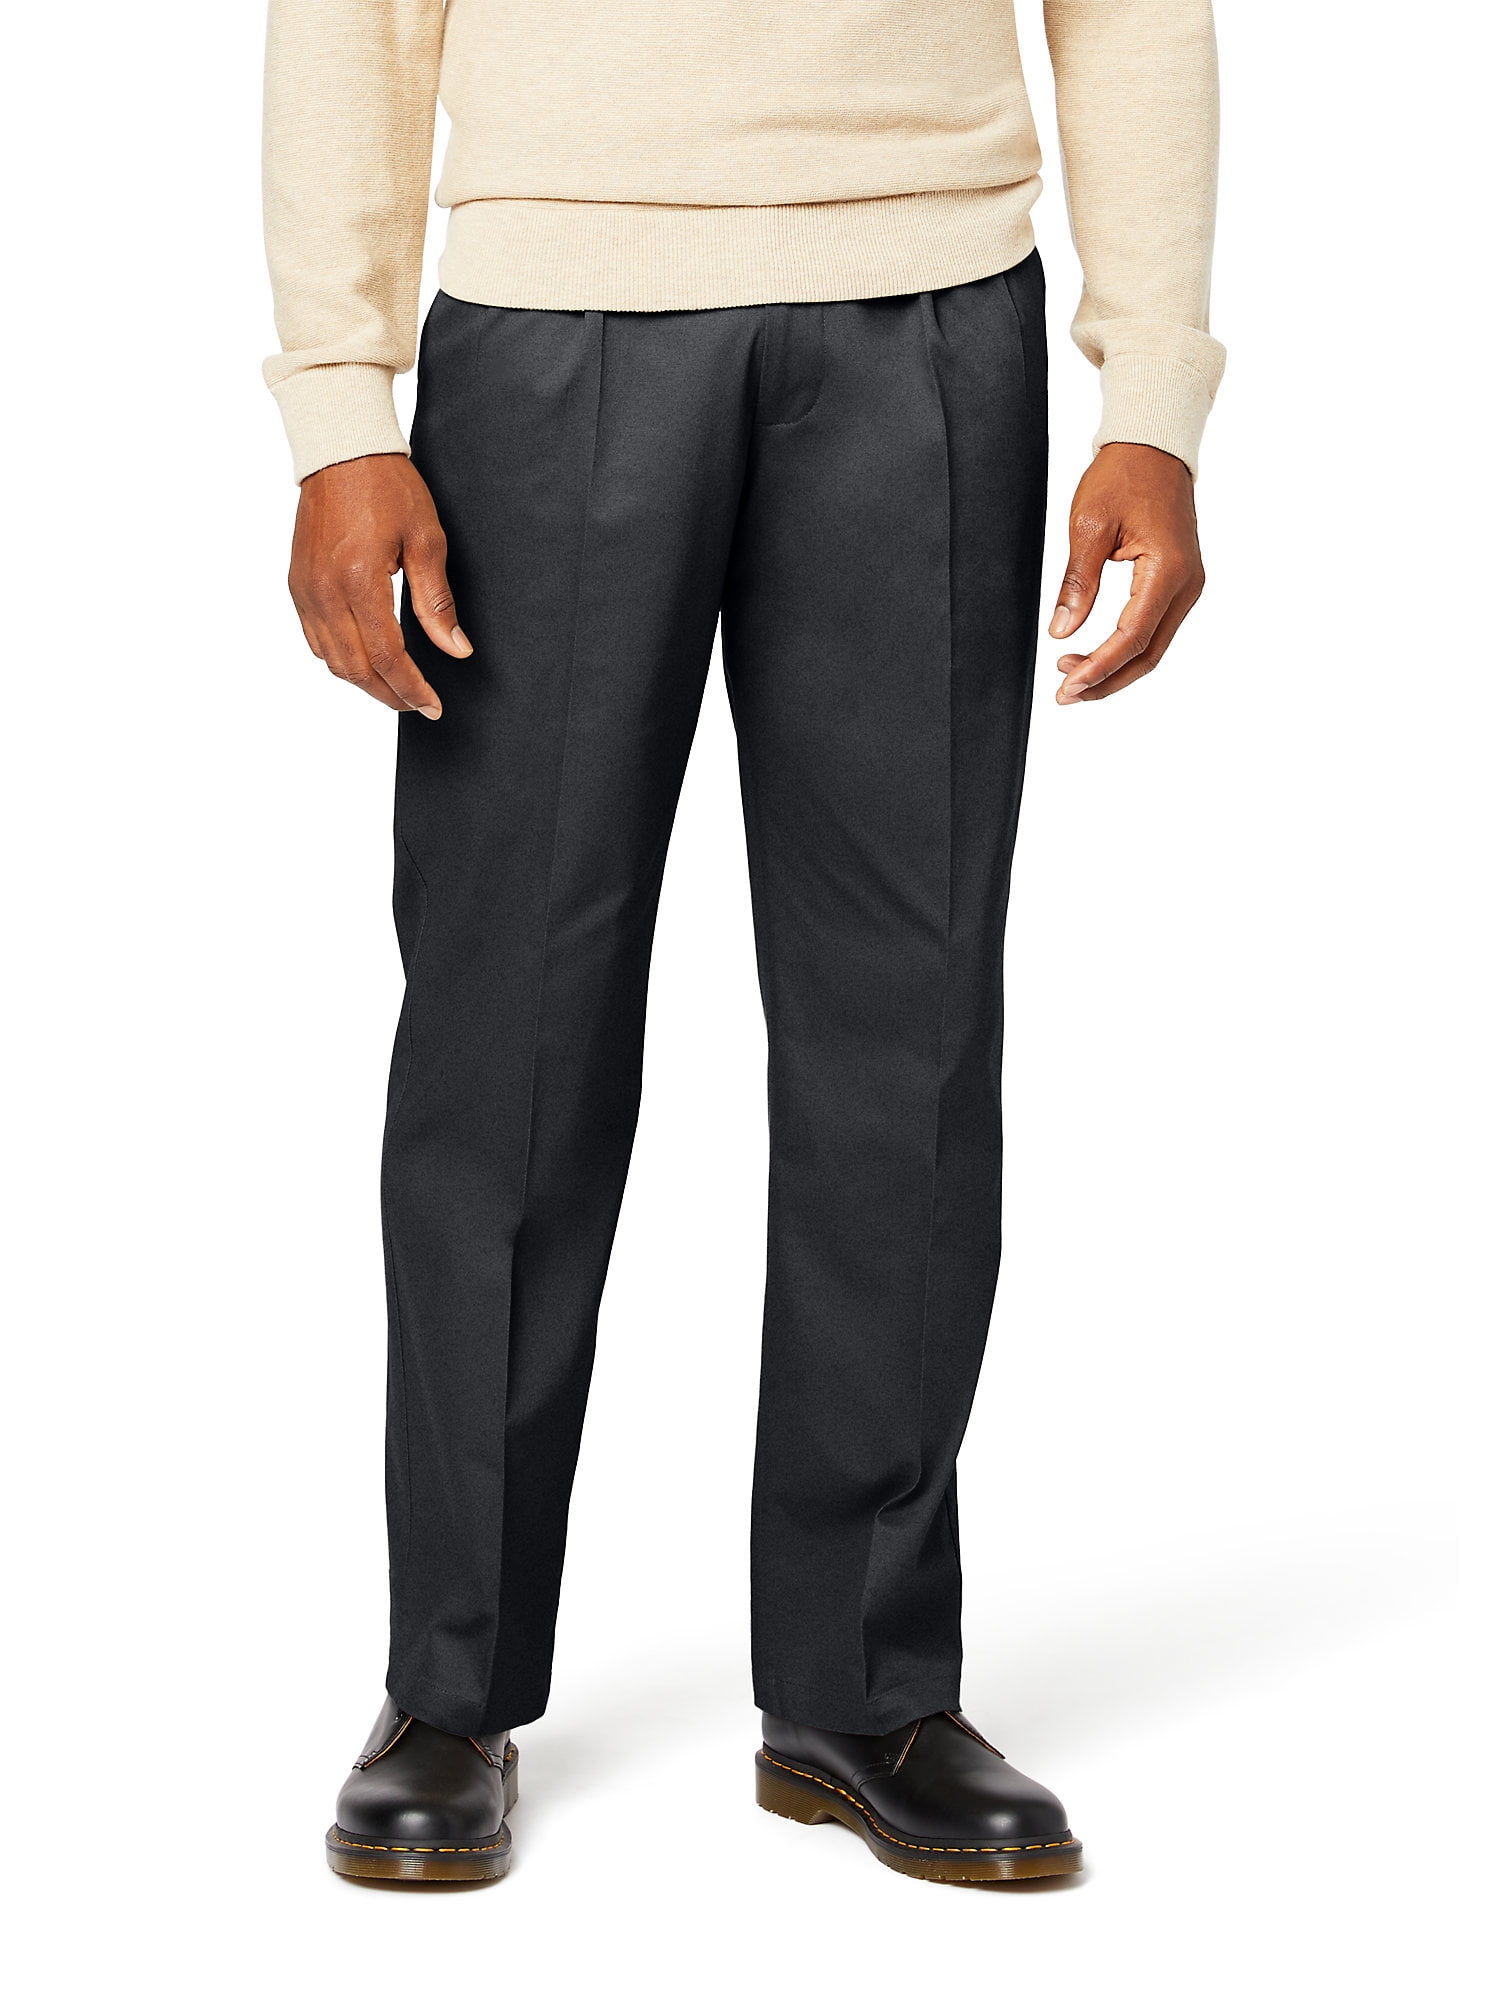 Pleated Dockers Men's Relaxed Fit Comfort Khaki Pants 